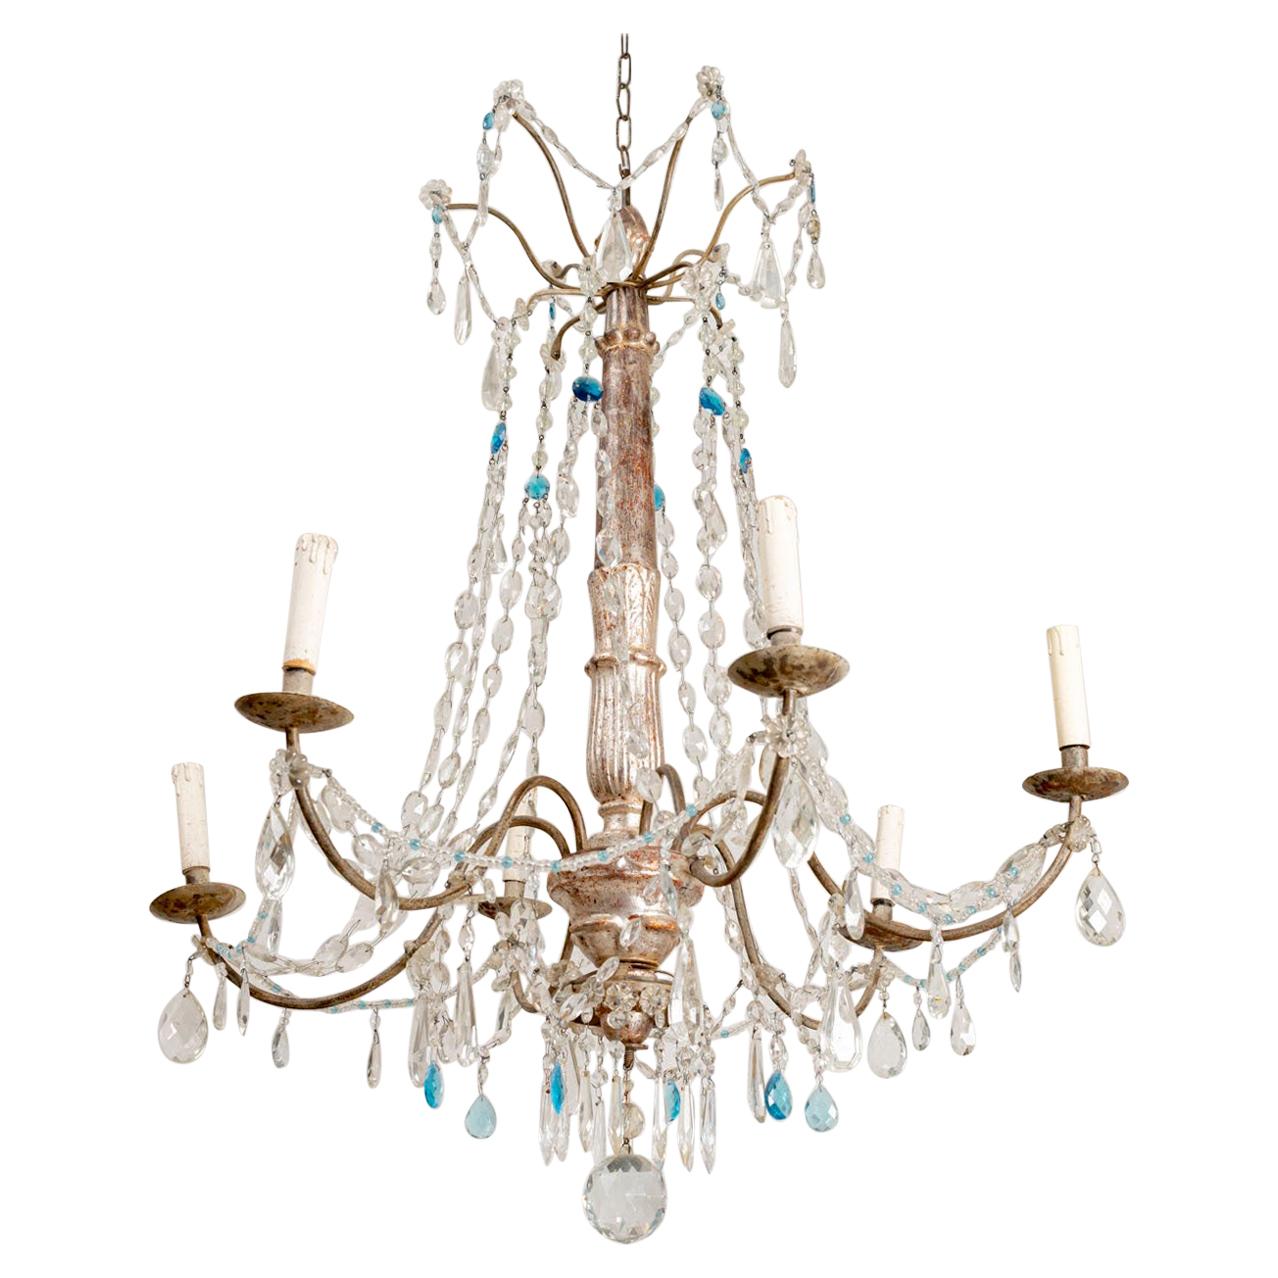 Early 19th Century Italian 6 Arm Crystal & Silver Gilt Carved Wooden Chandelier